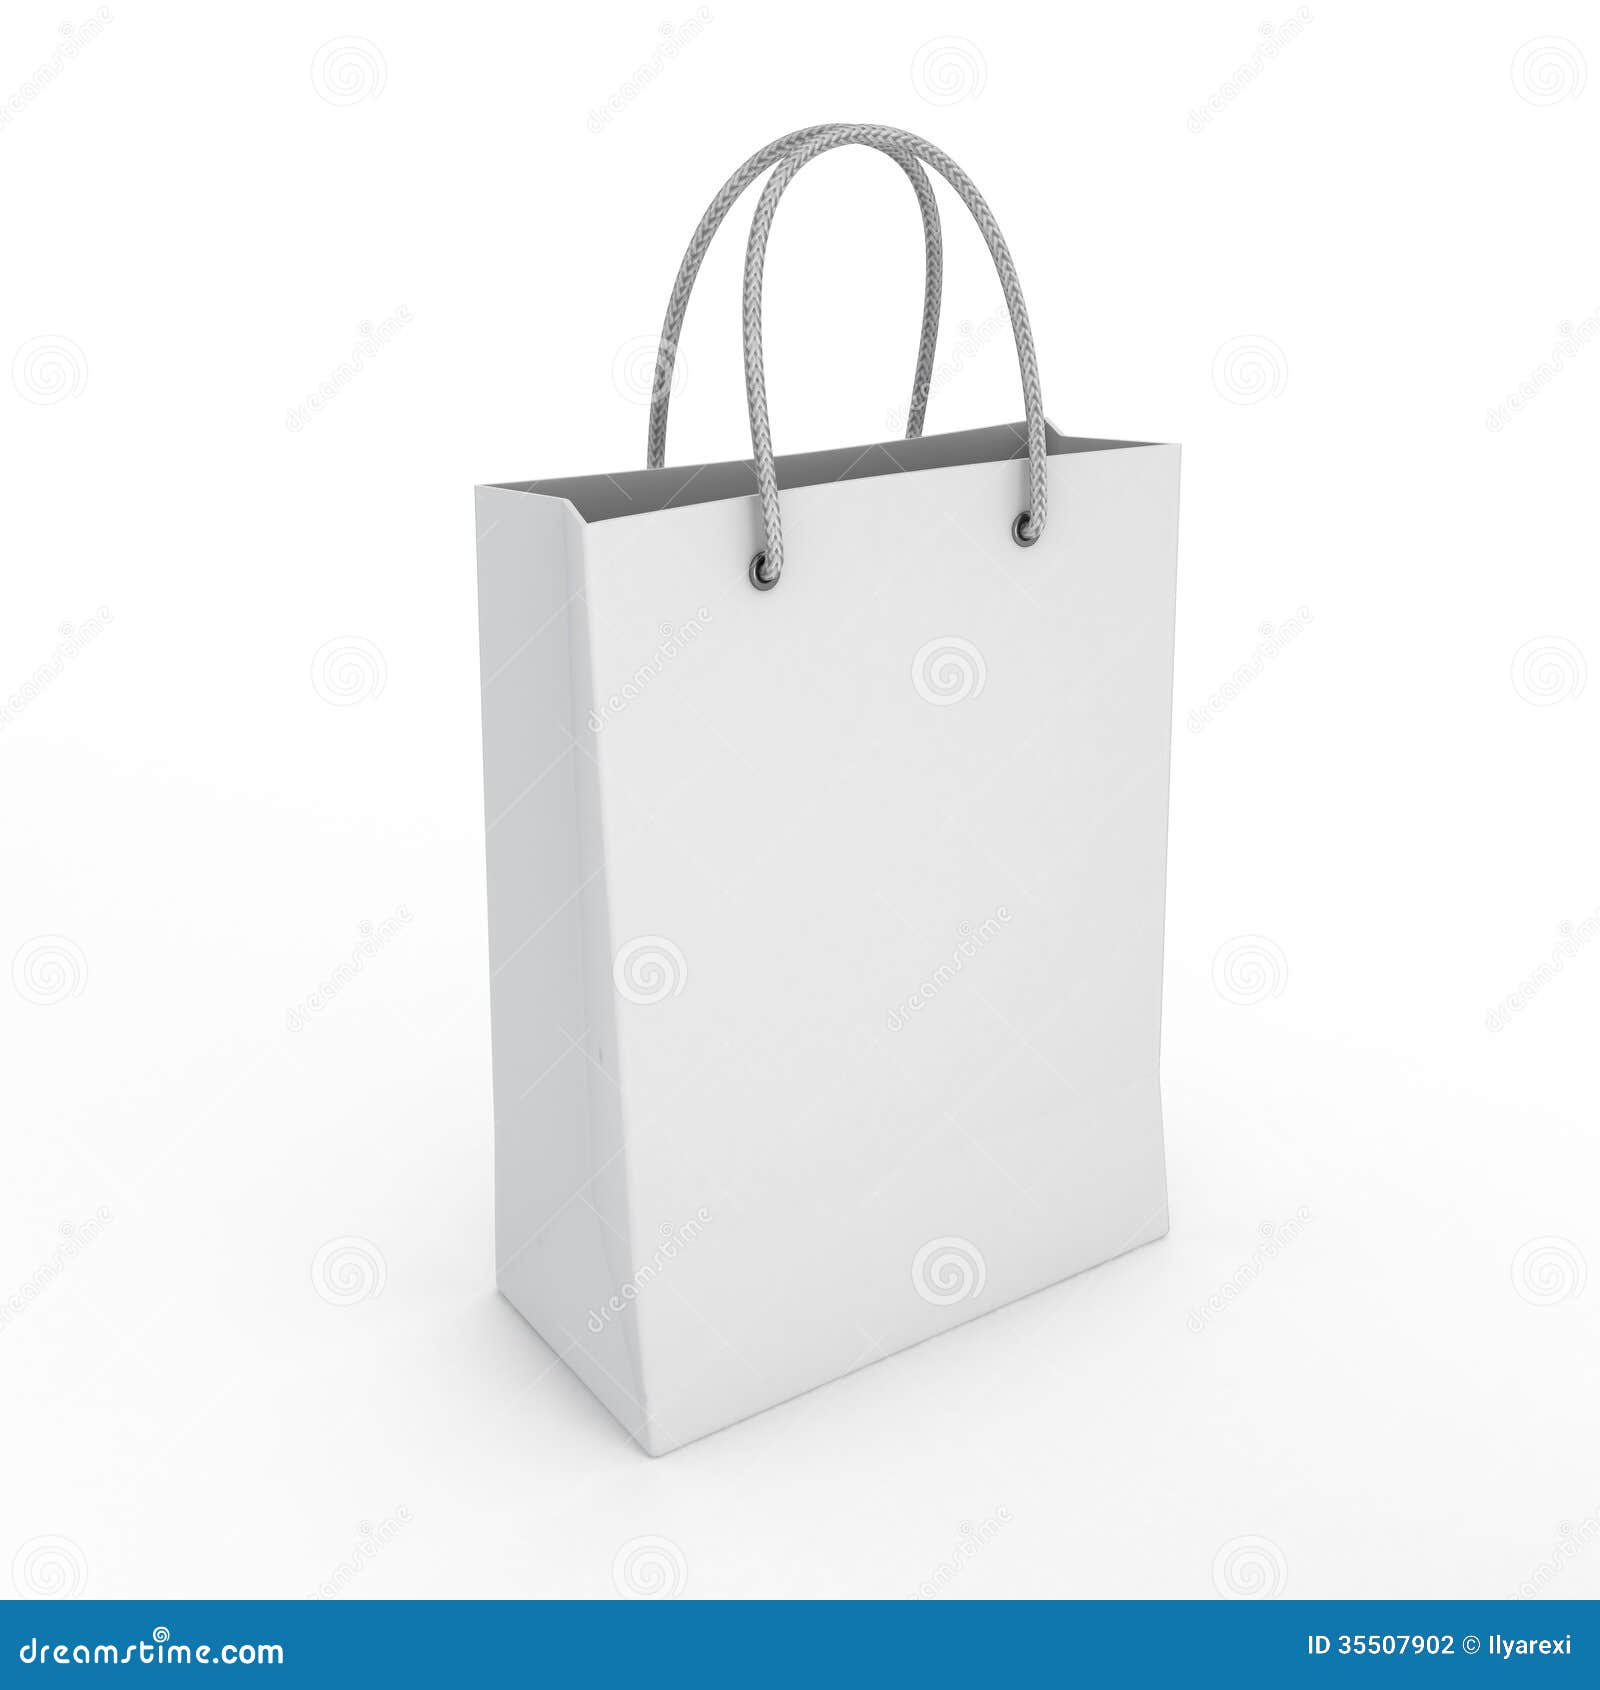 Empty White Shop Bag Royalty Free Stock Images - Image: 34835979